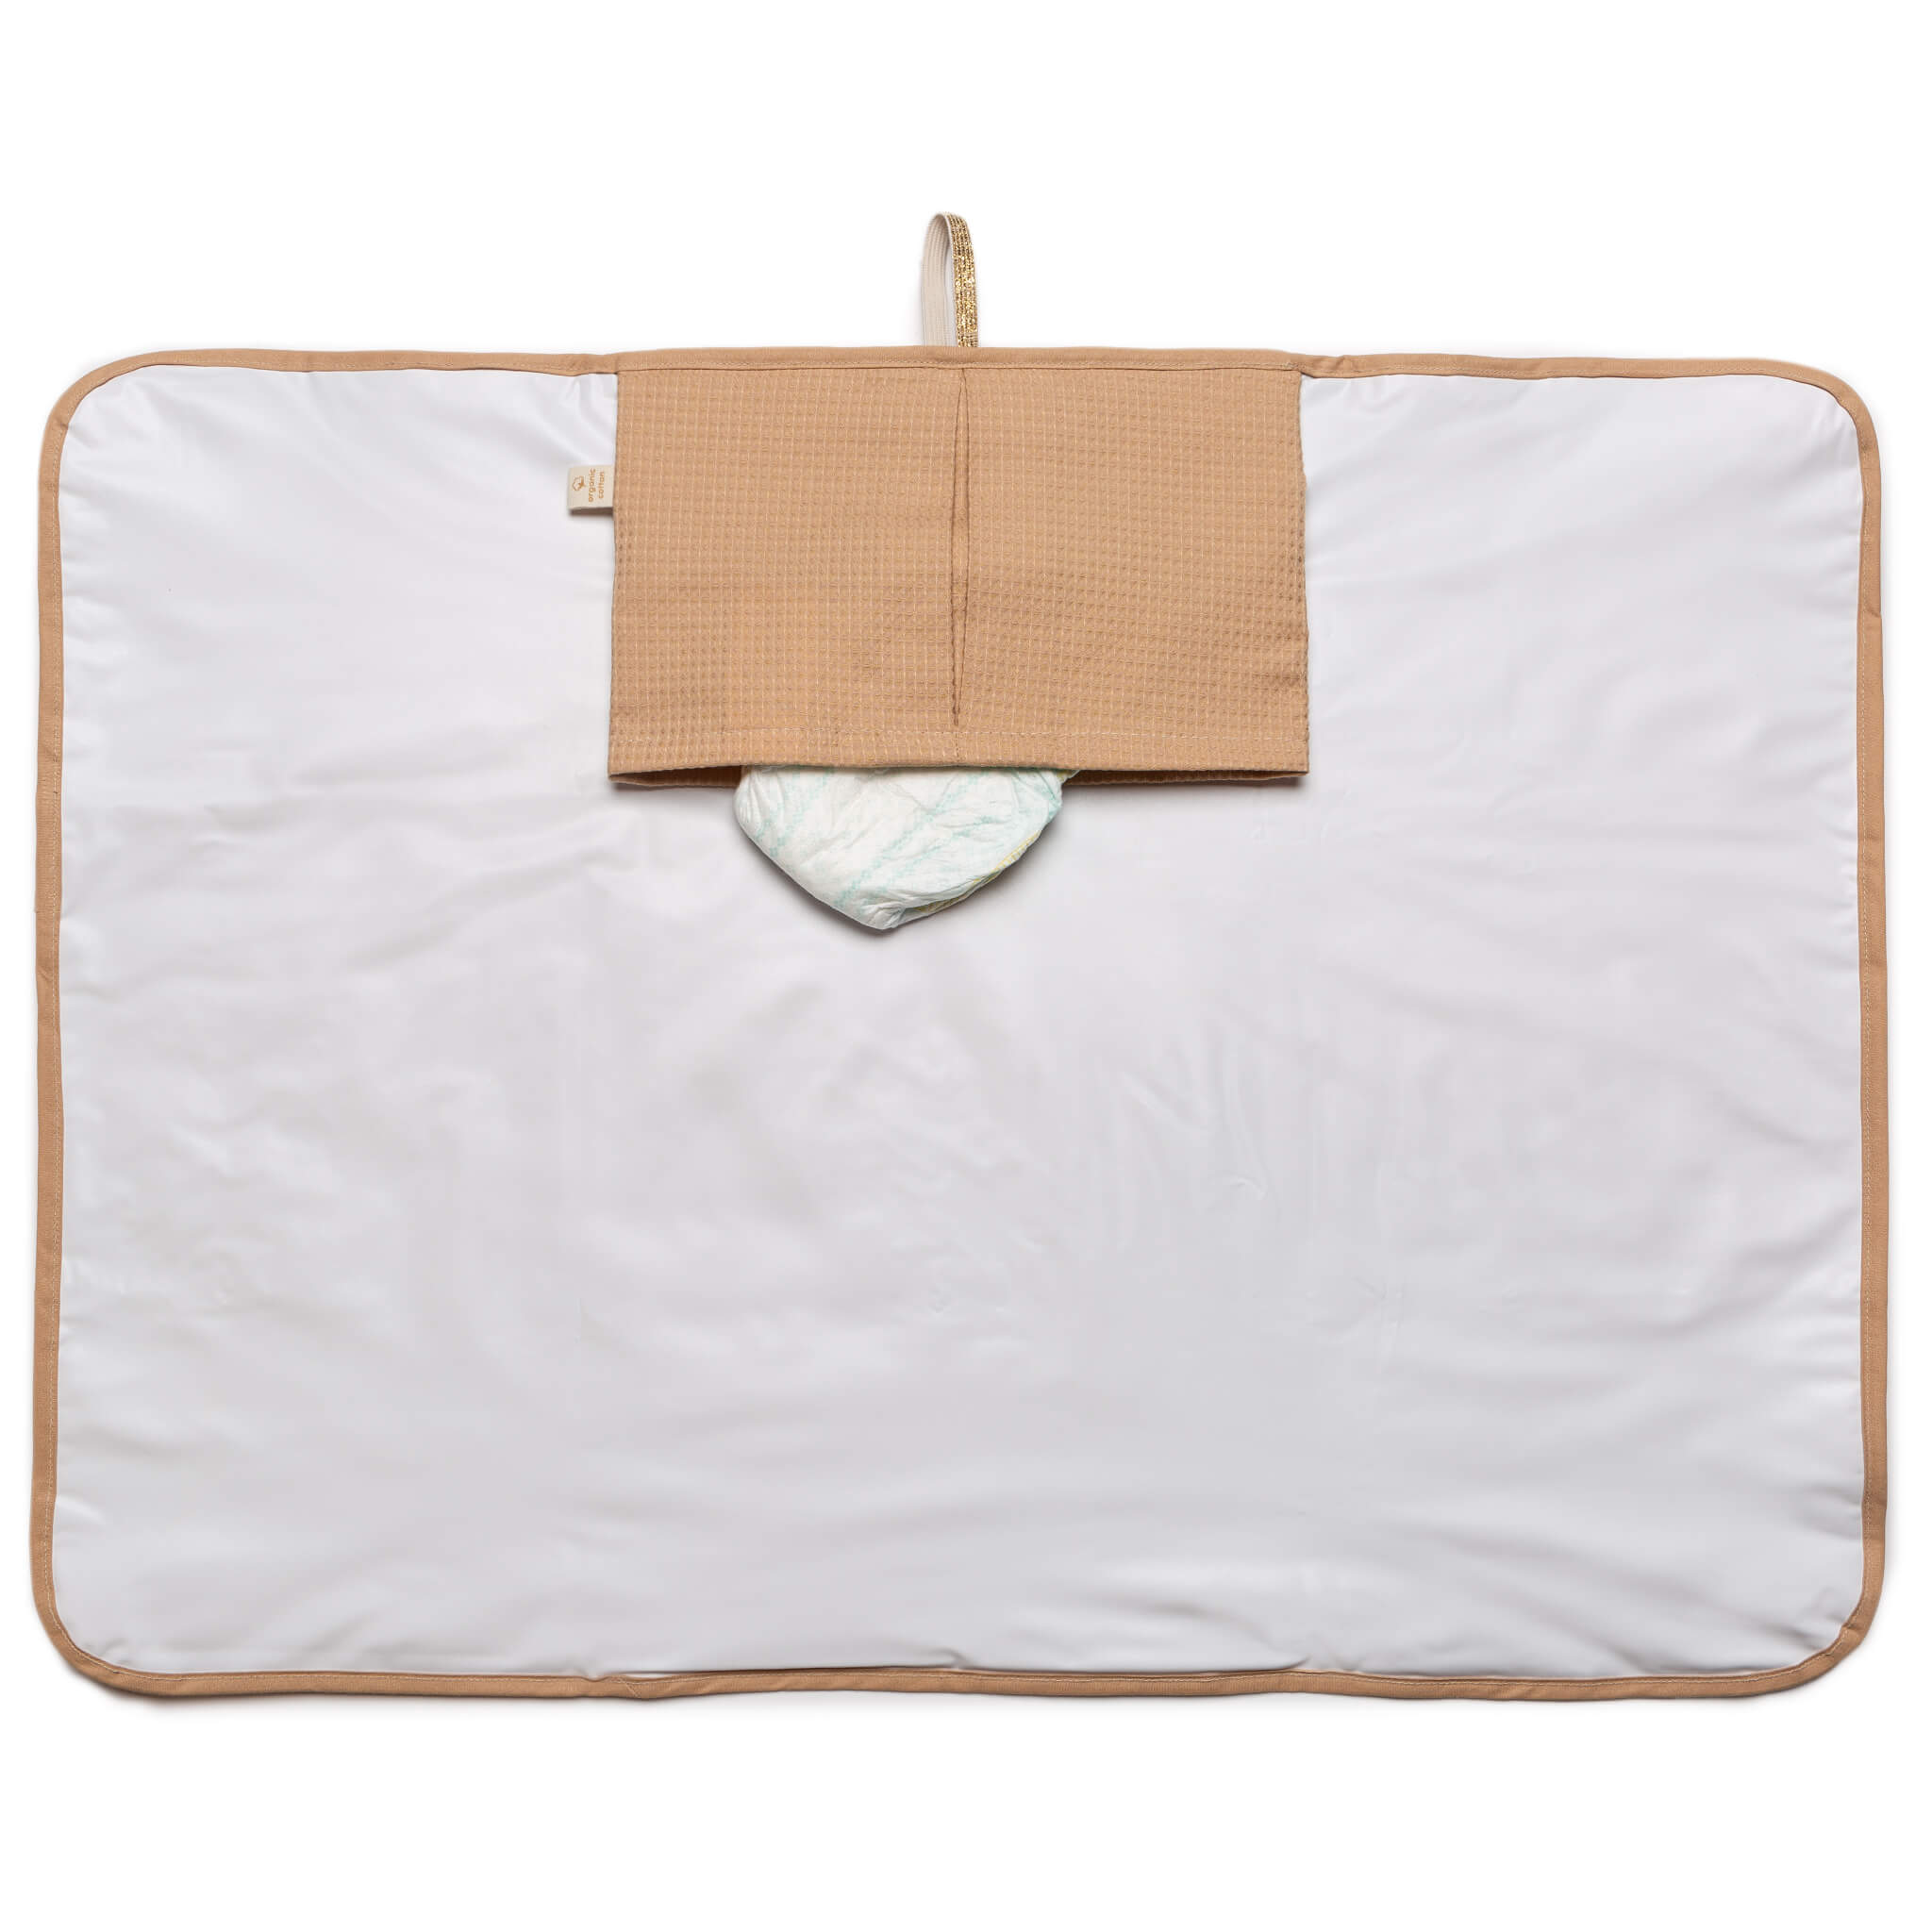 Nobodinoz Mozart Changing Pad in Nude Inside